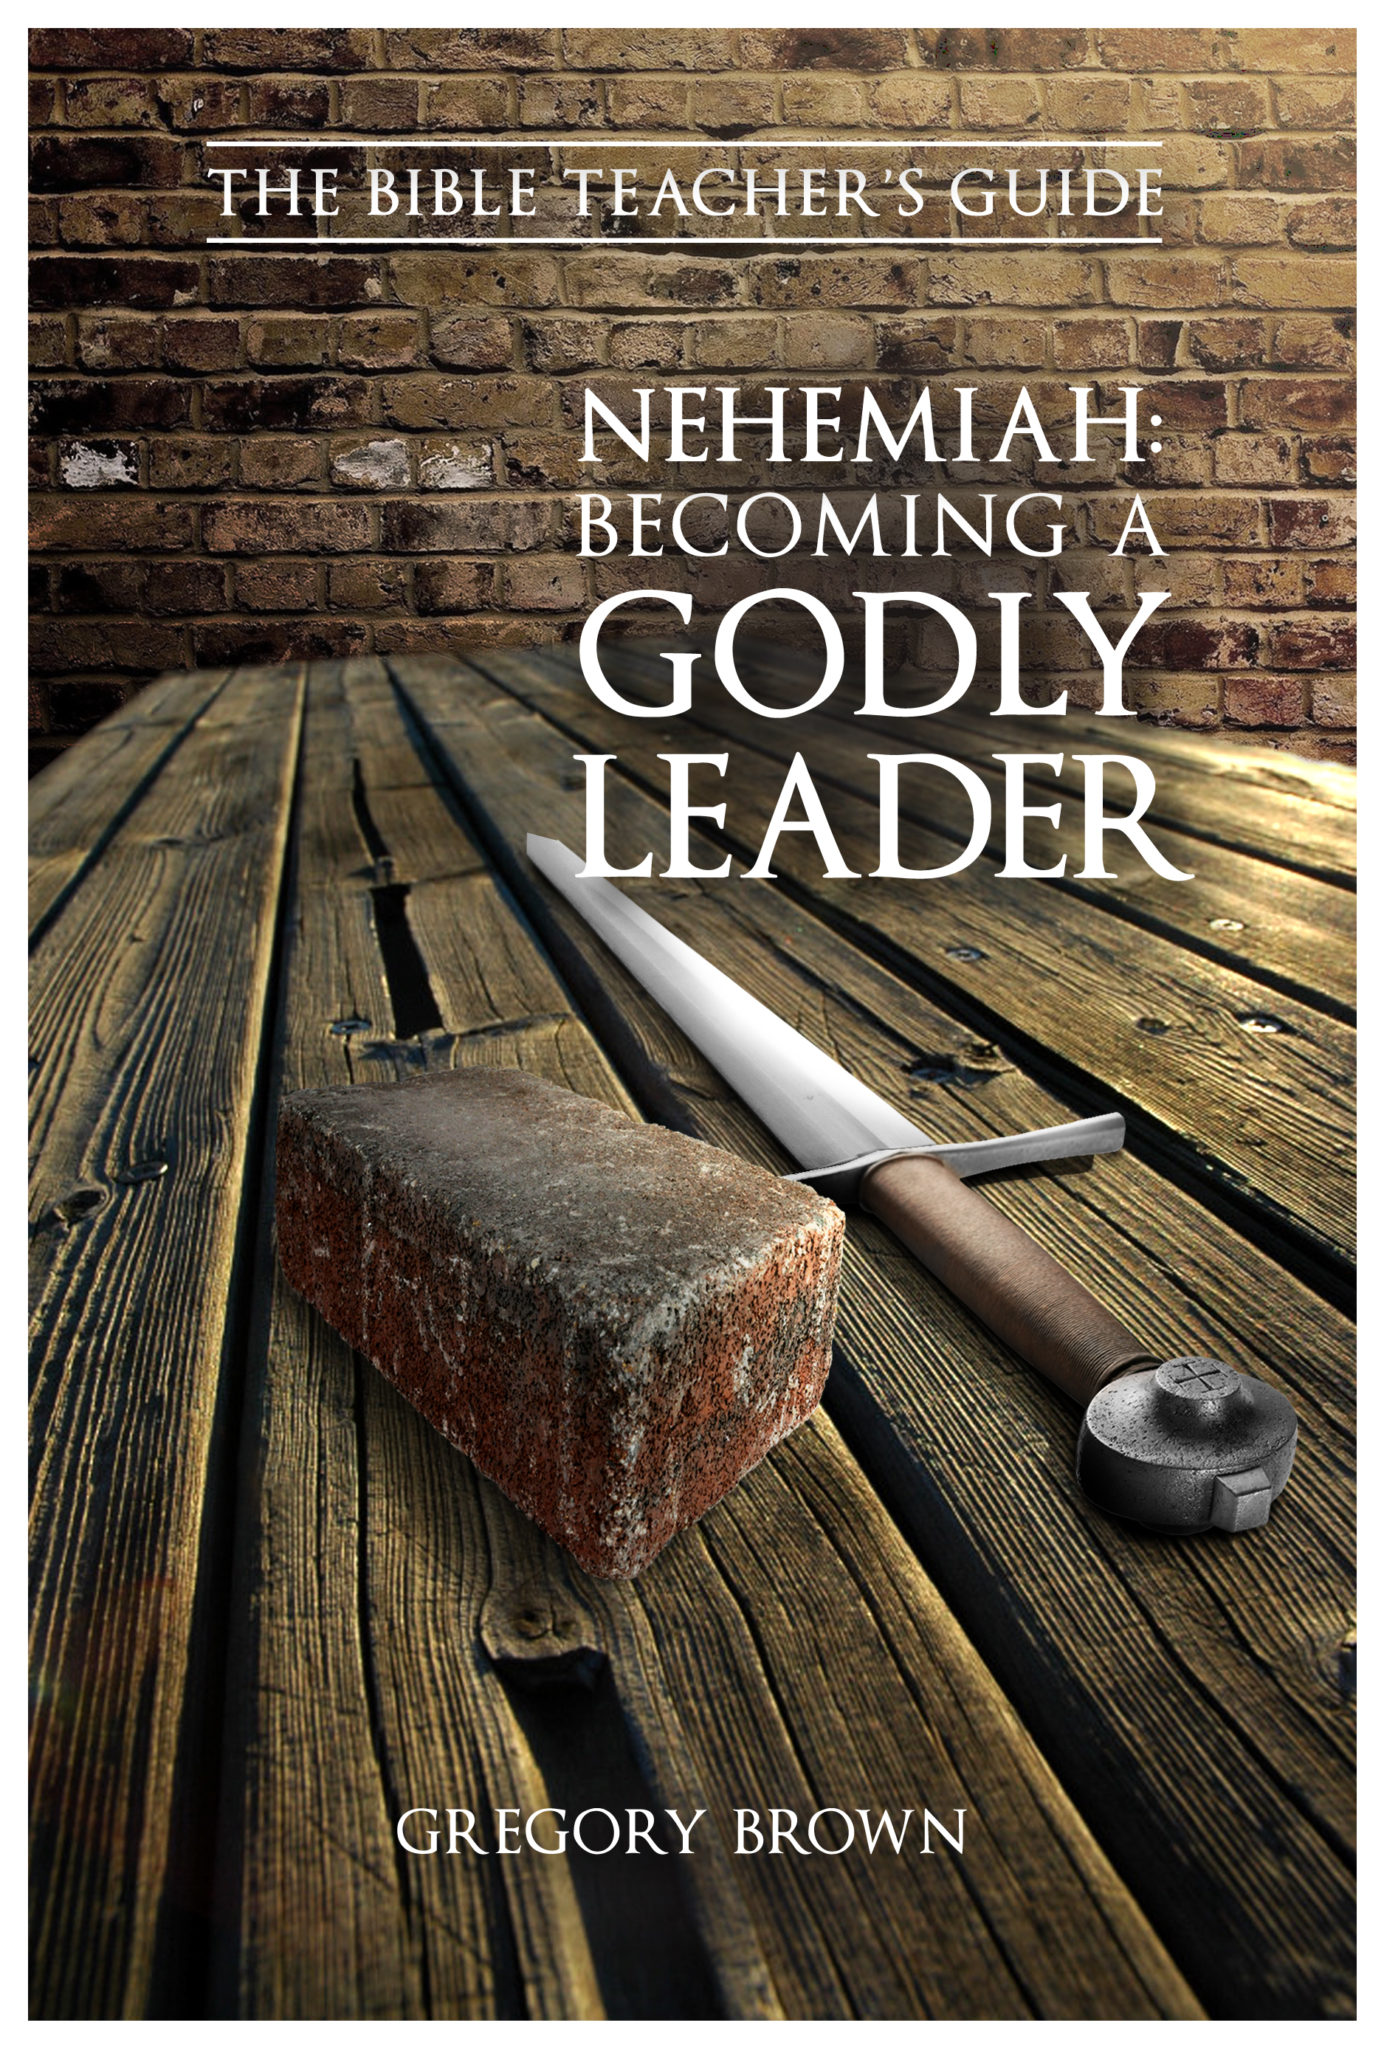 FREE: Nehemiah: Becoming a Godly Leader (The Bible Teacher’s Guide) by Gregory Brown